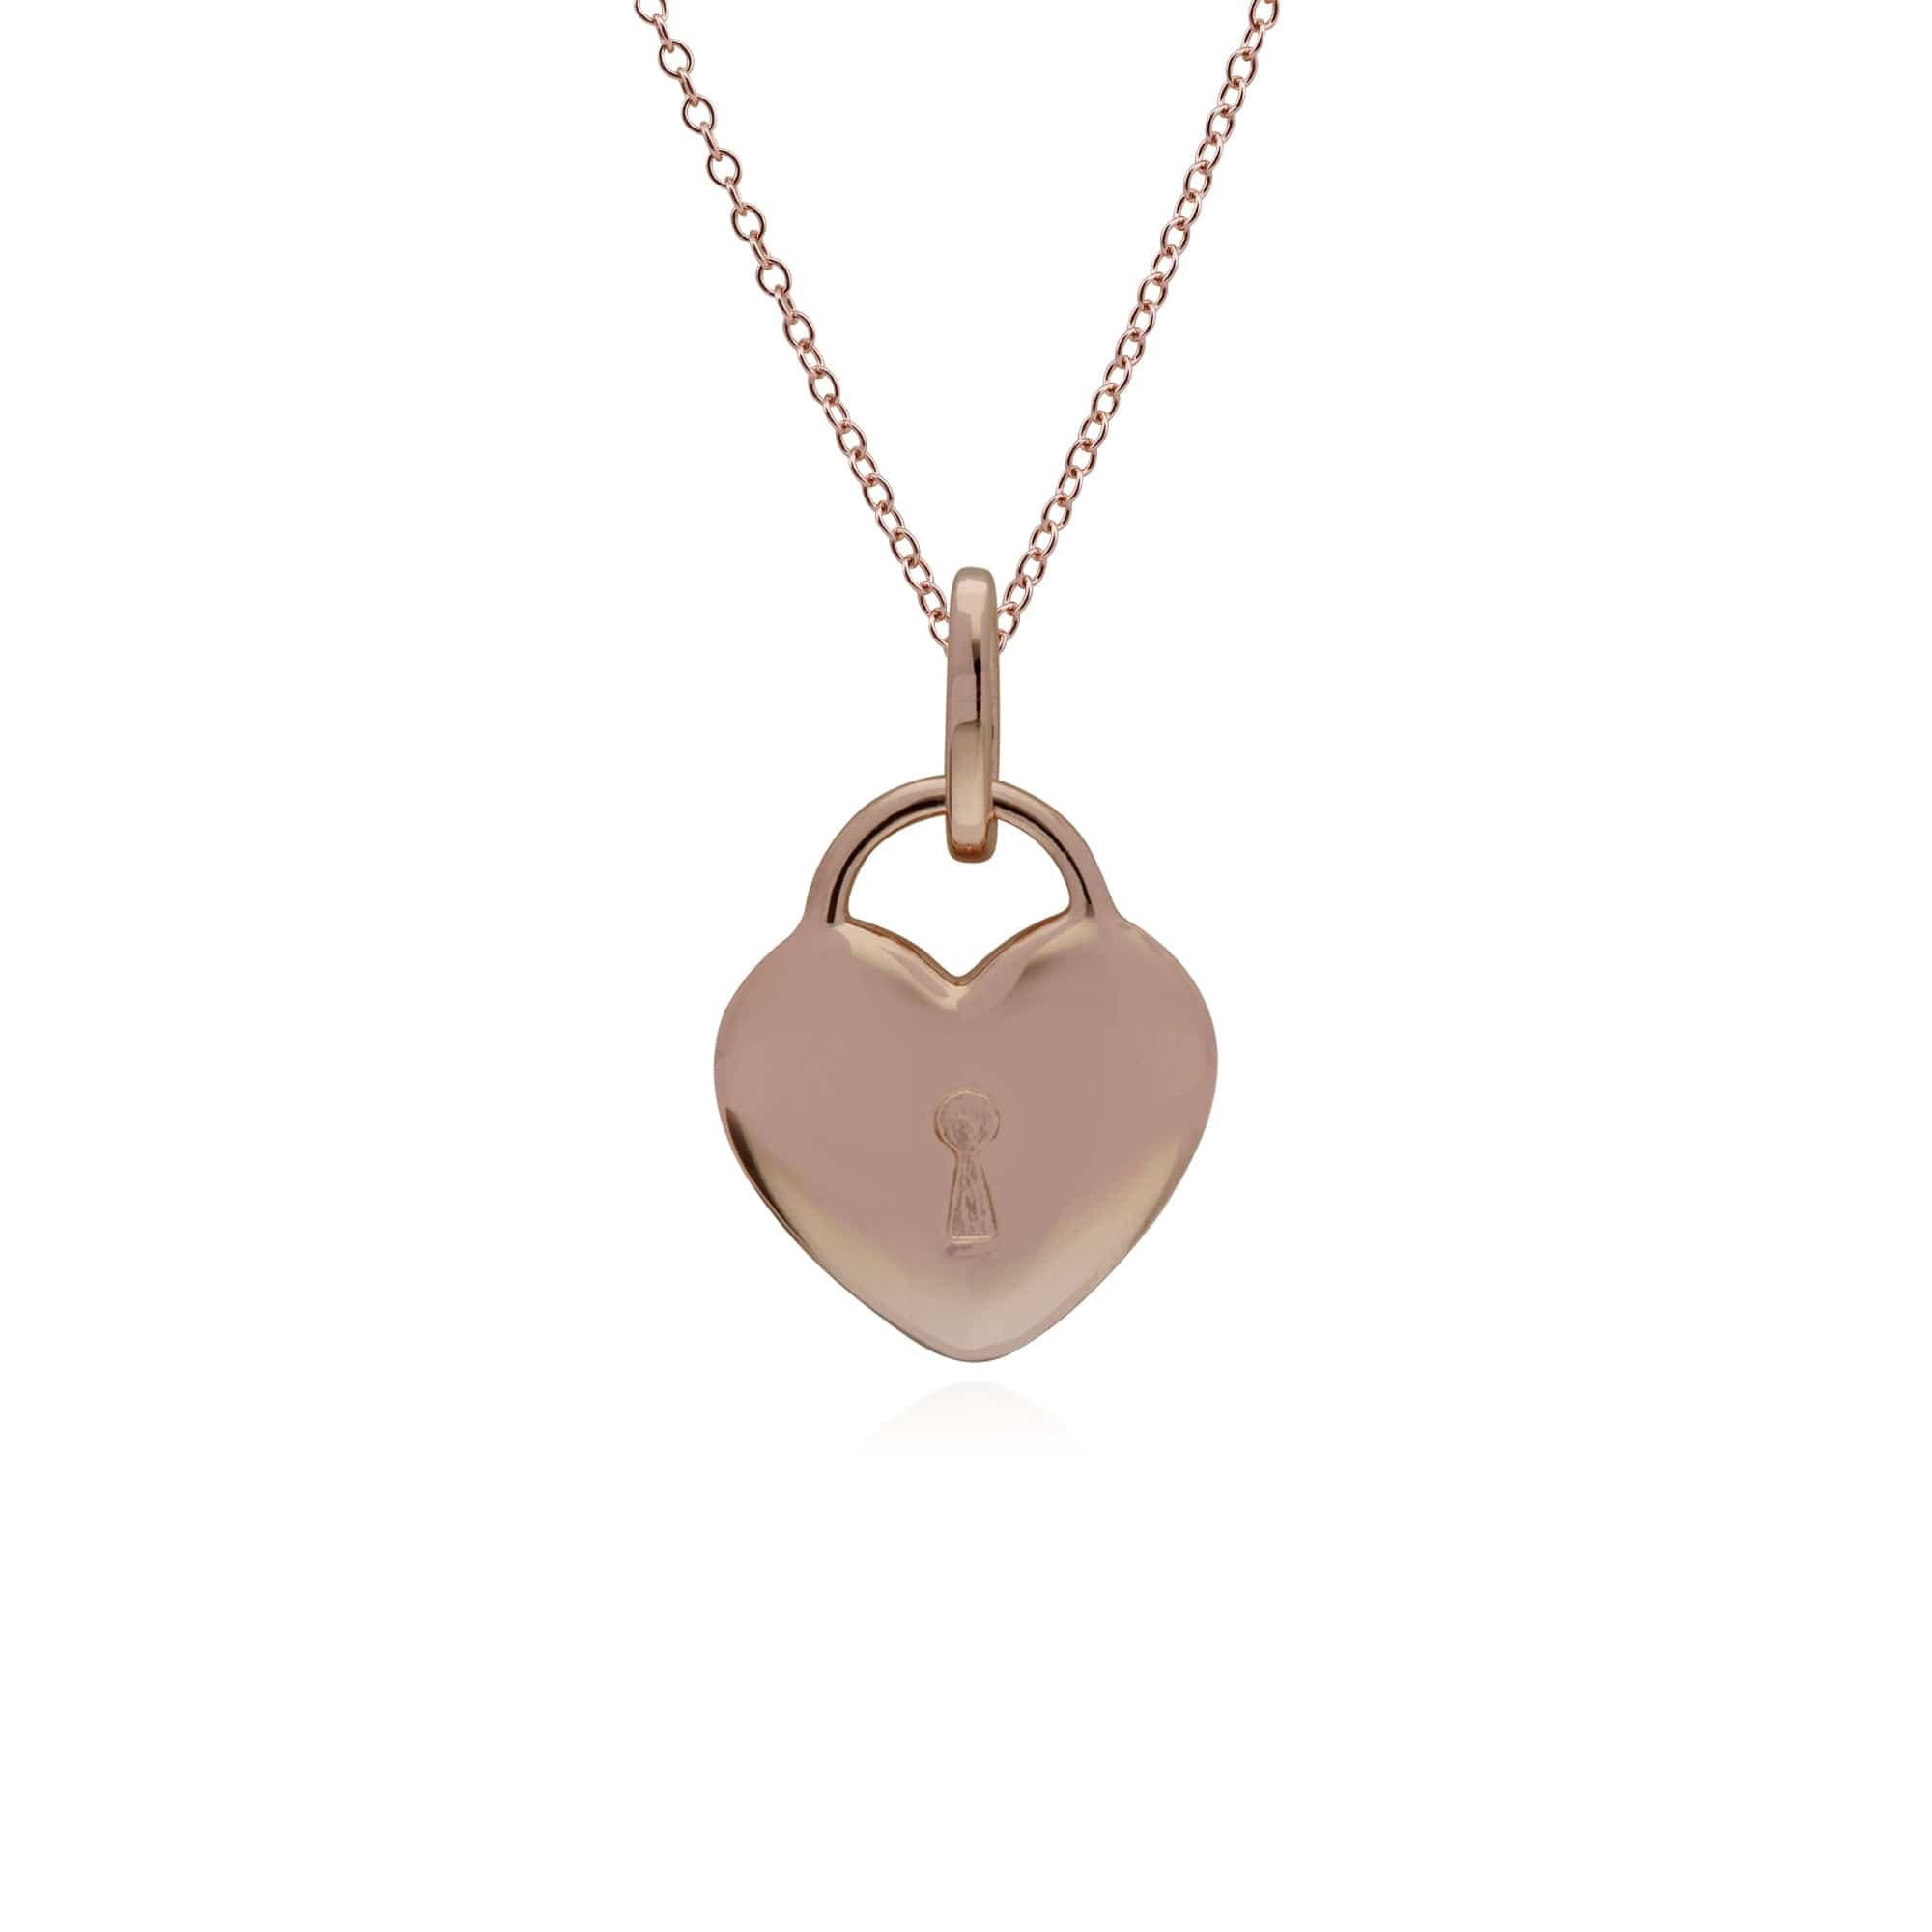 270P025904925-270P026901925 Classic Plain Heart Lock Pendant & Jade Charm in Rose Gold Plated 925 Sterling Silver 3